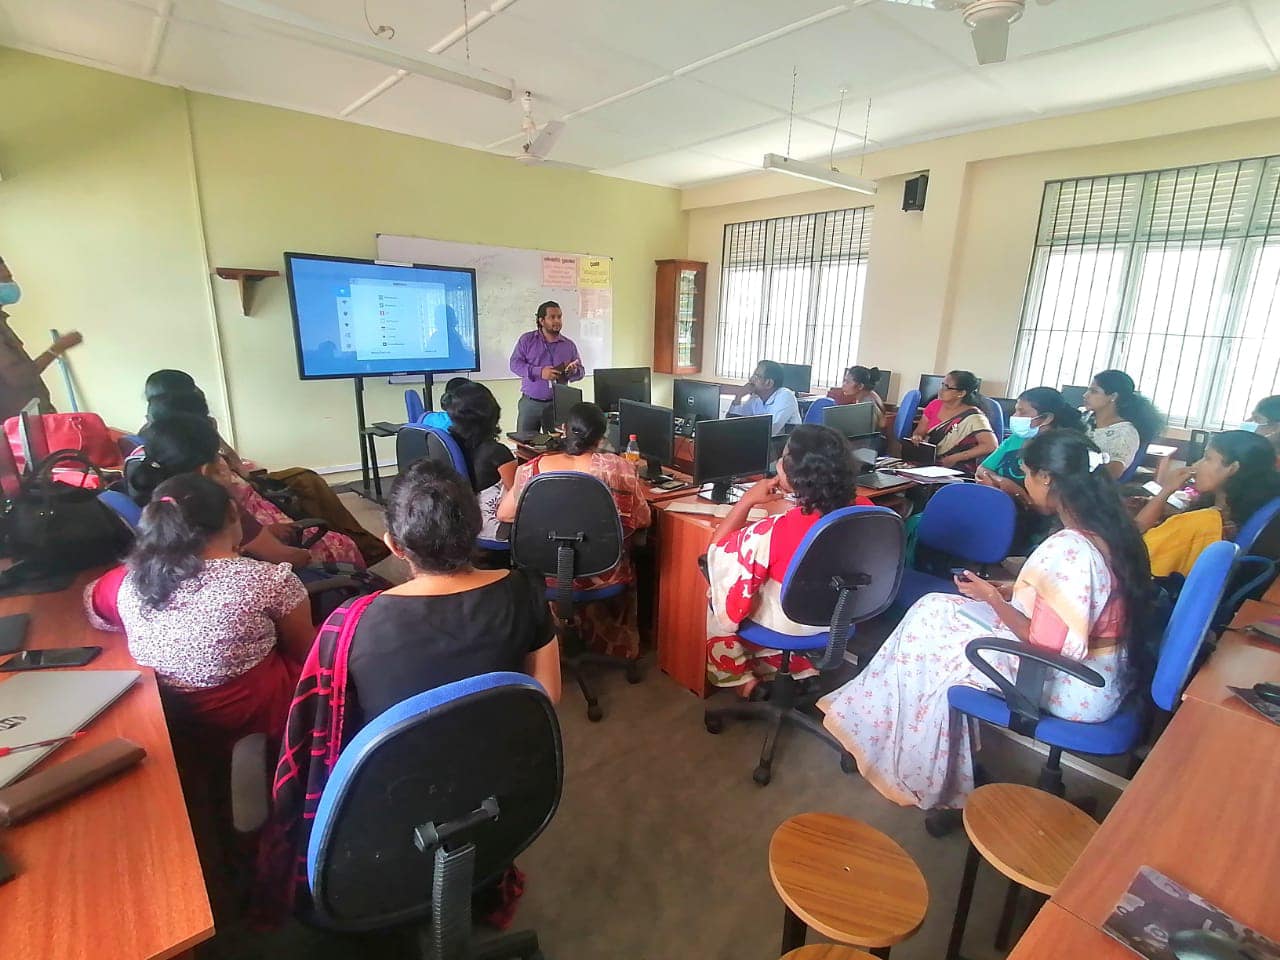 Smart classroom concepts and applications” මිනුවන්ගොඩ.